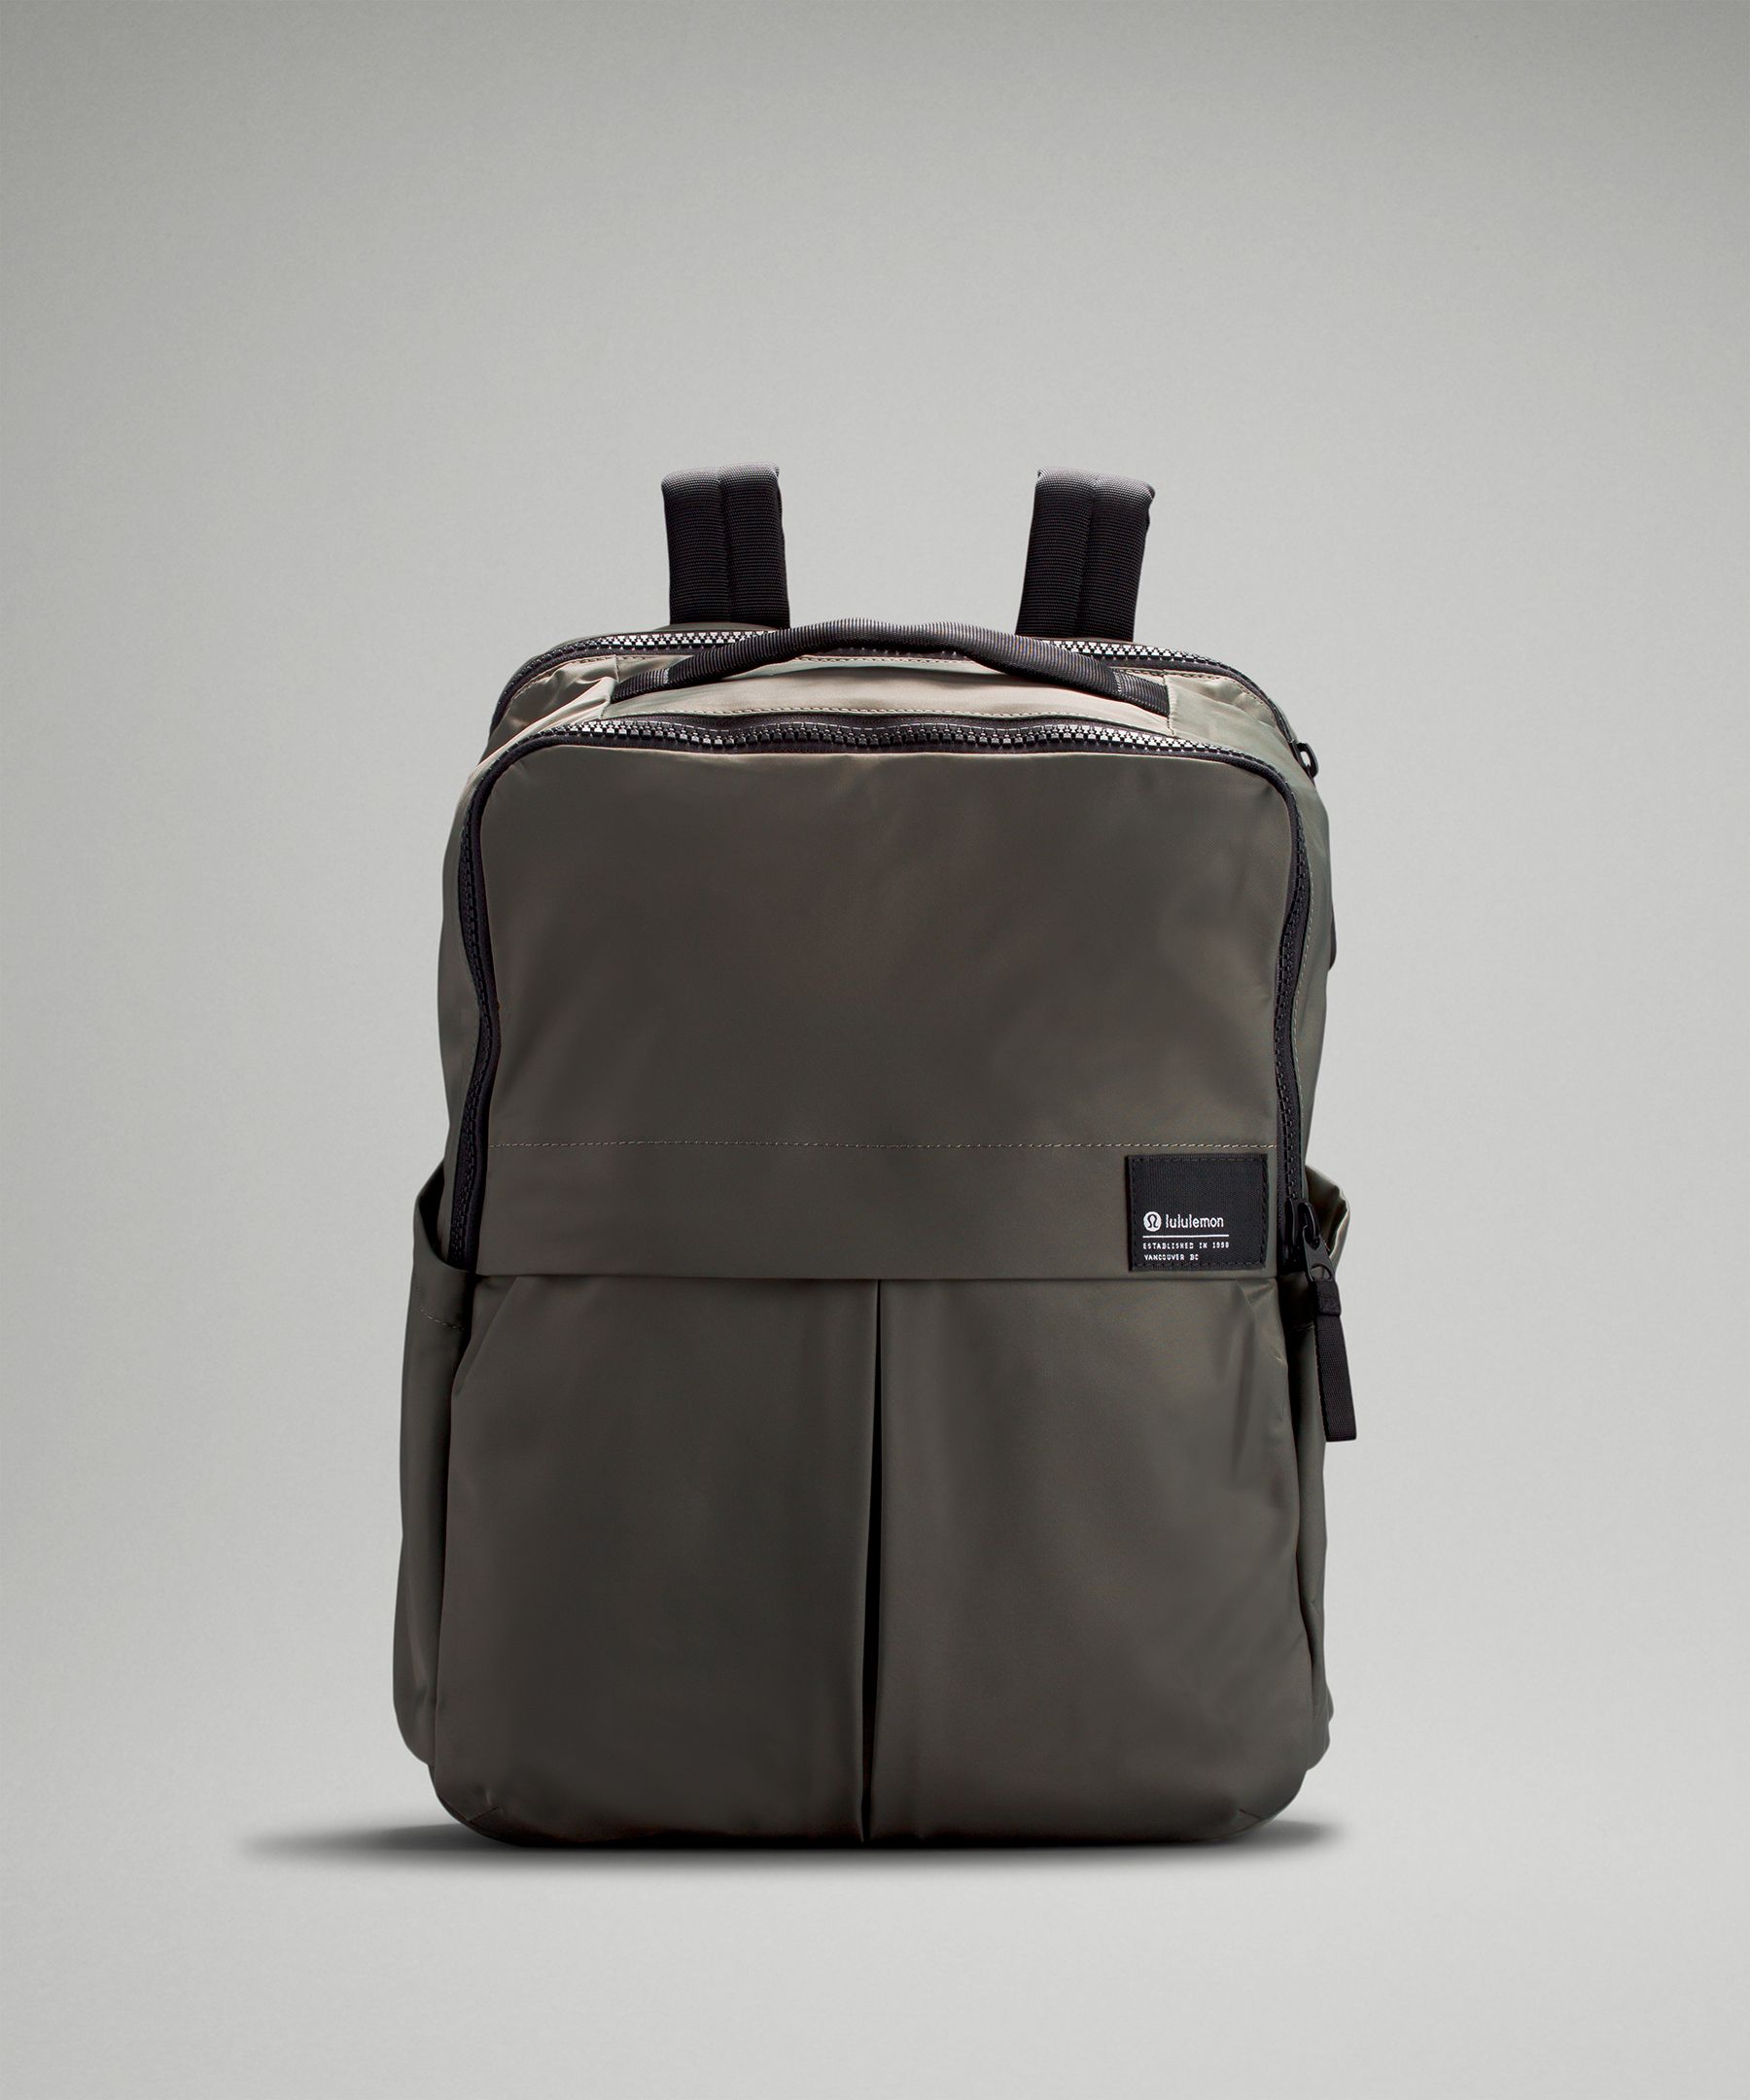 Lululemon On The Move Everyday Backpack Grey Sage Green